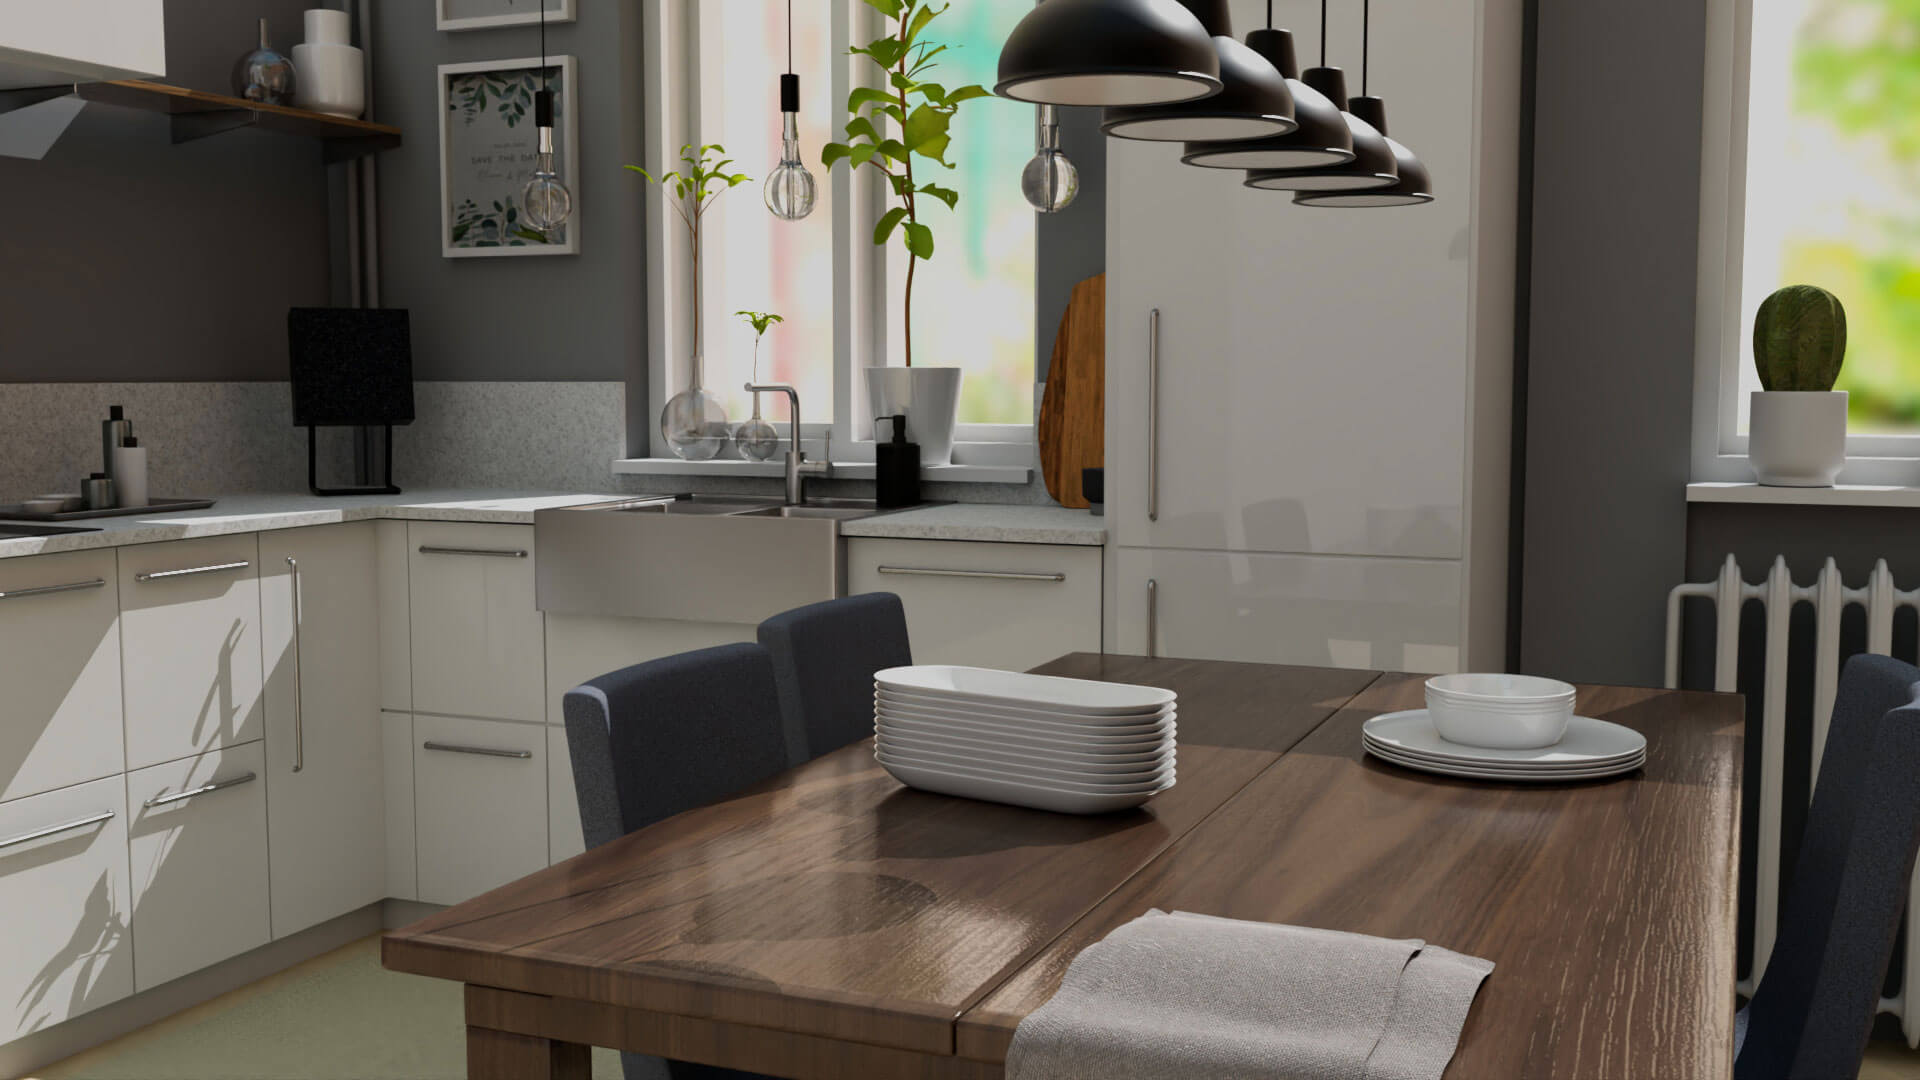 A simple kitchen with a table with plates stacked on top and counters and a sink in the background